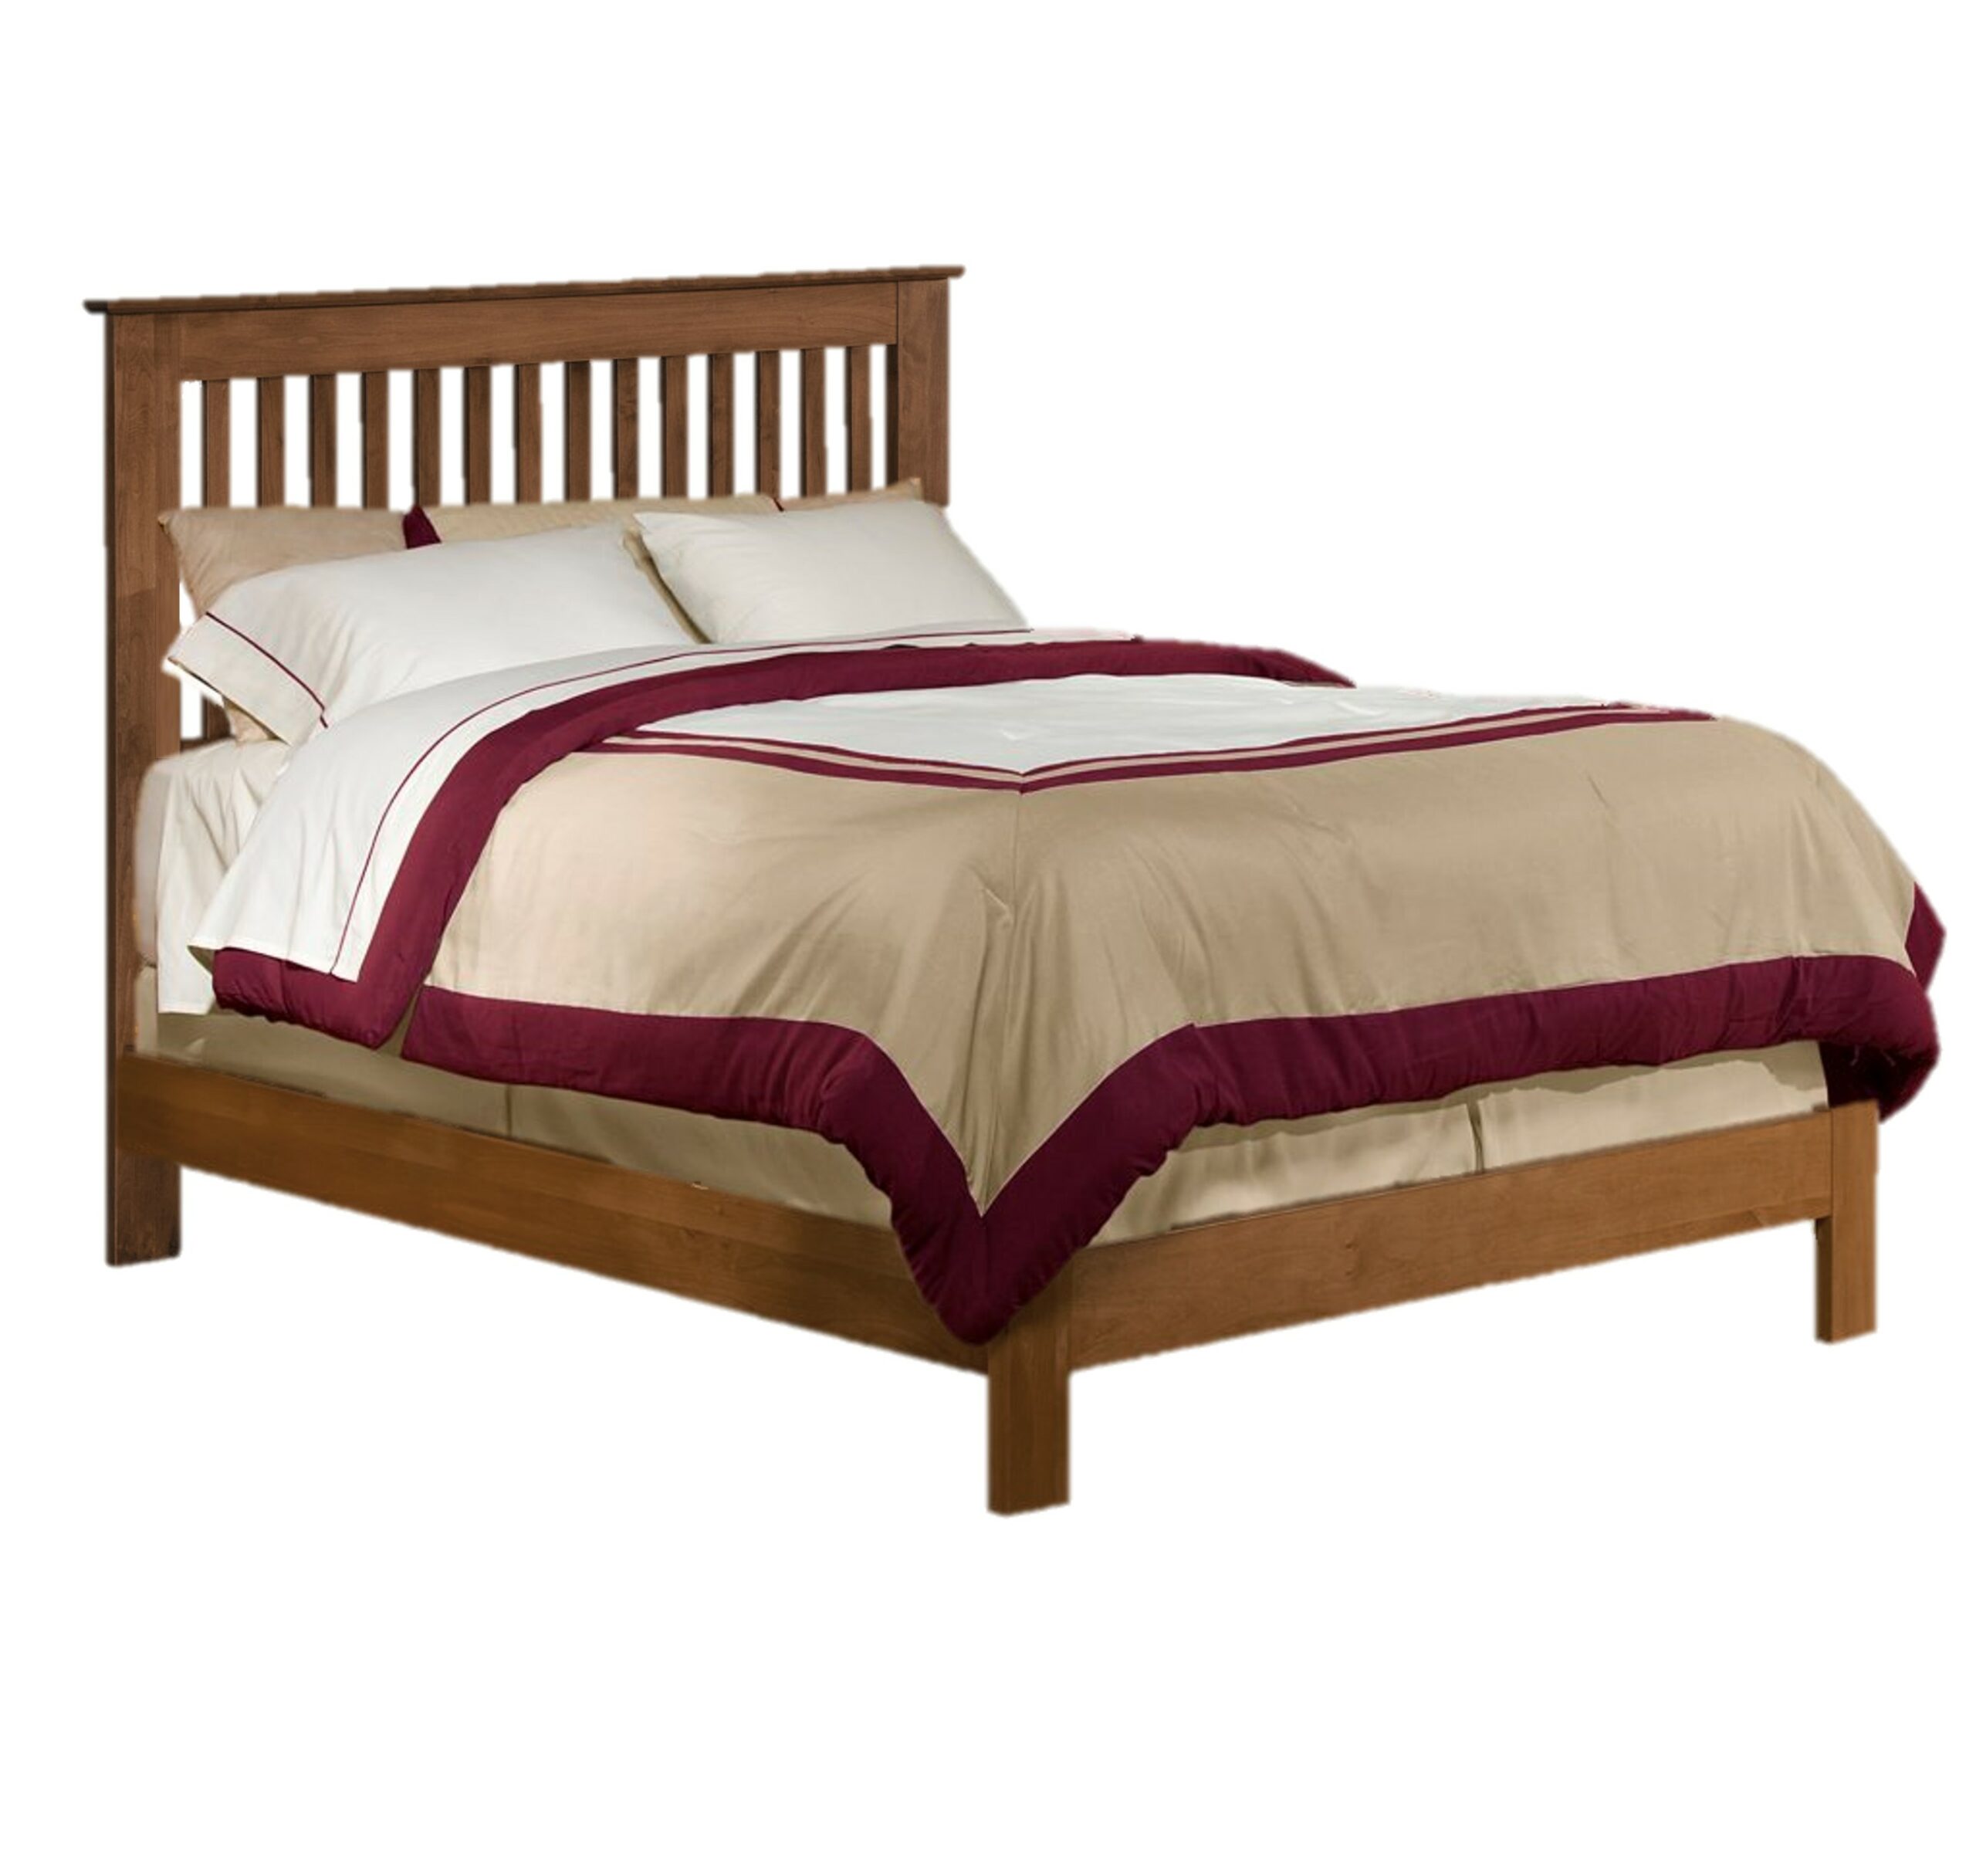 Shaker Slat Queen Size Tuscan Brown